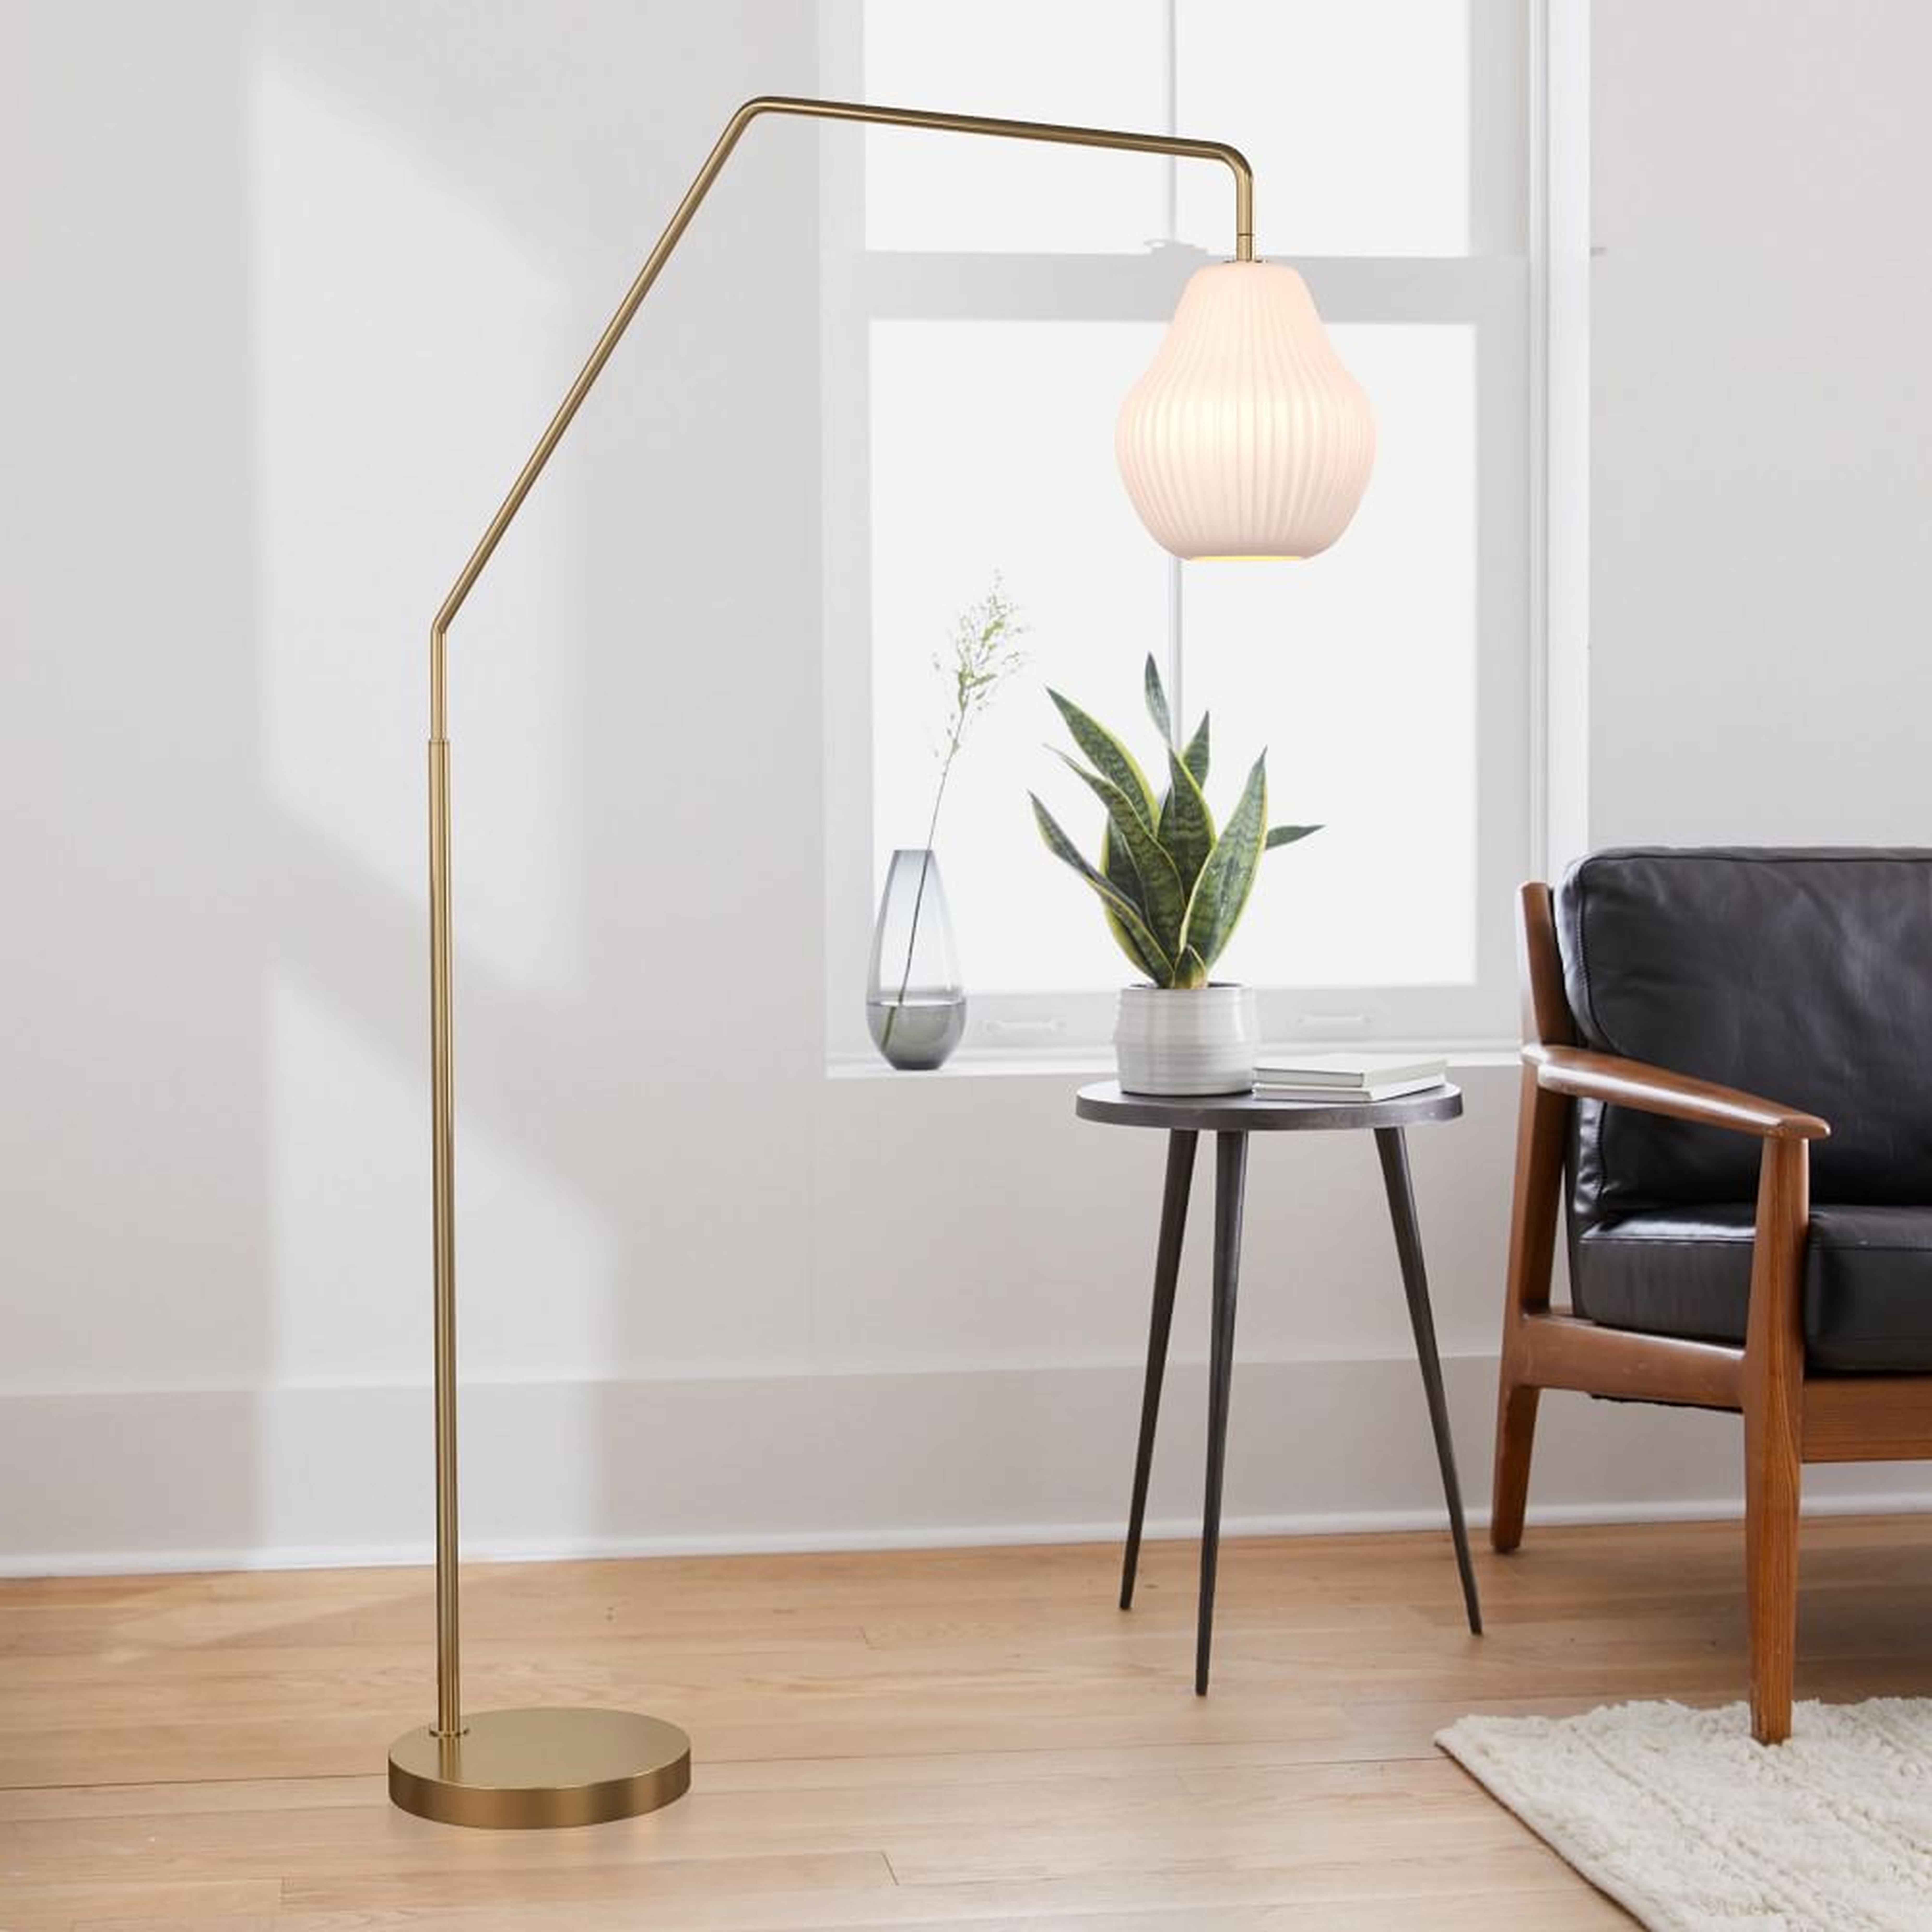 Sculptural Overarching Floor Lamp, Ribbed Small, Champagne, Antique Brass, 7.5" - West Elm